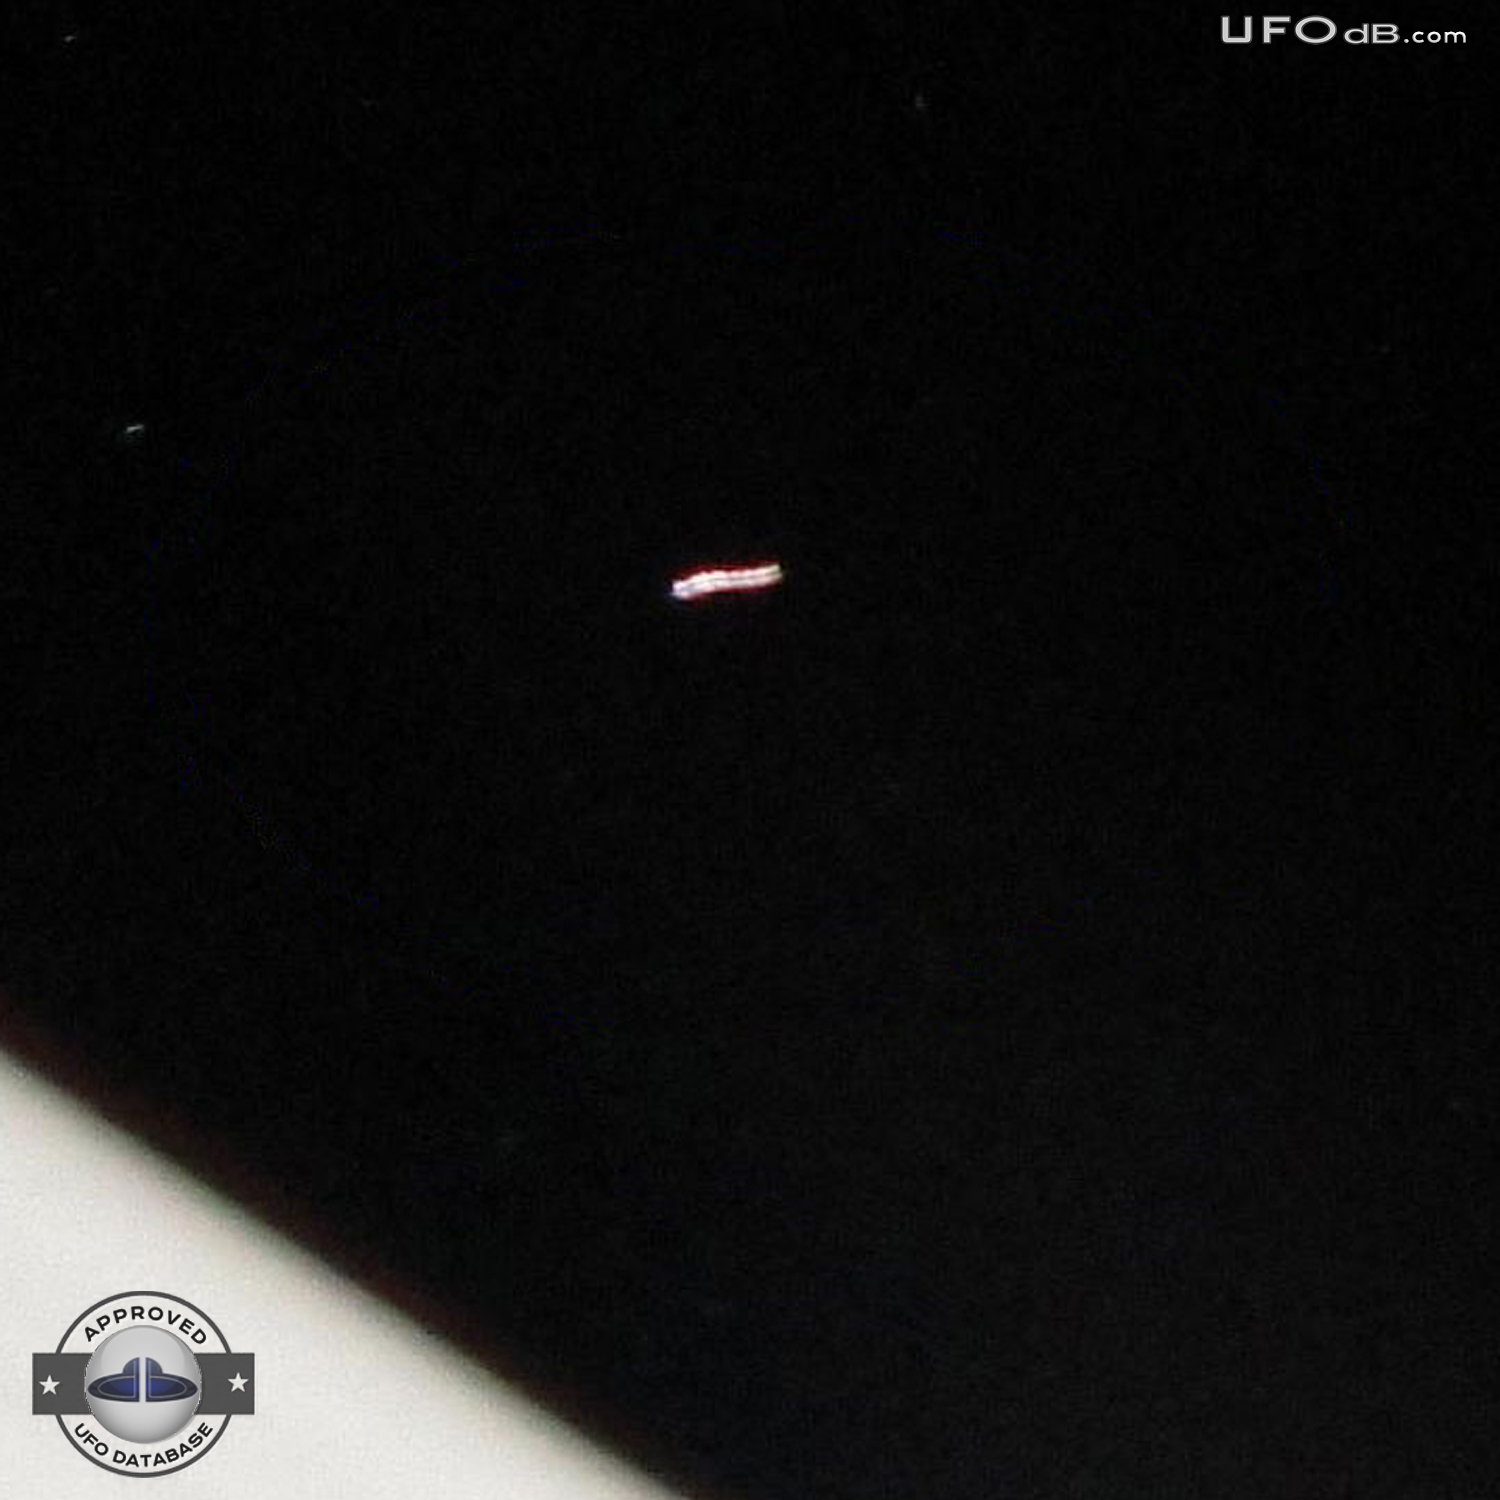 Bouncing UFO seen during Eclipse in Dominican Republic | December 2010 UFO Picture #313-2